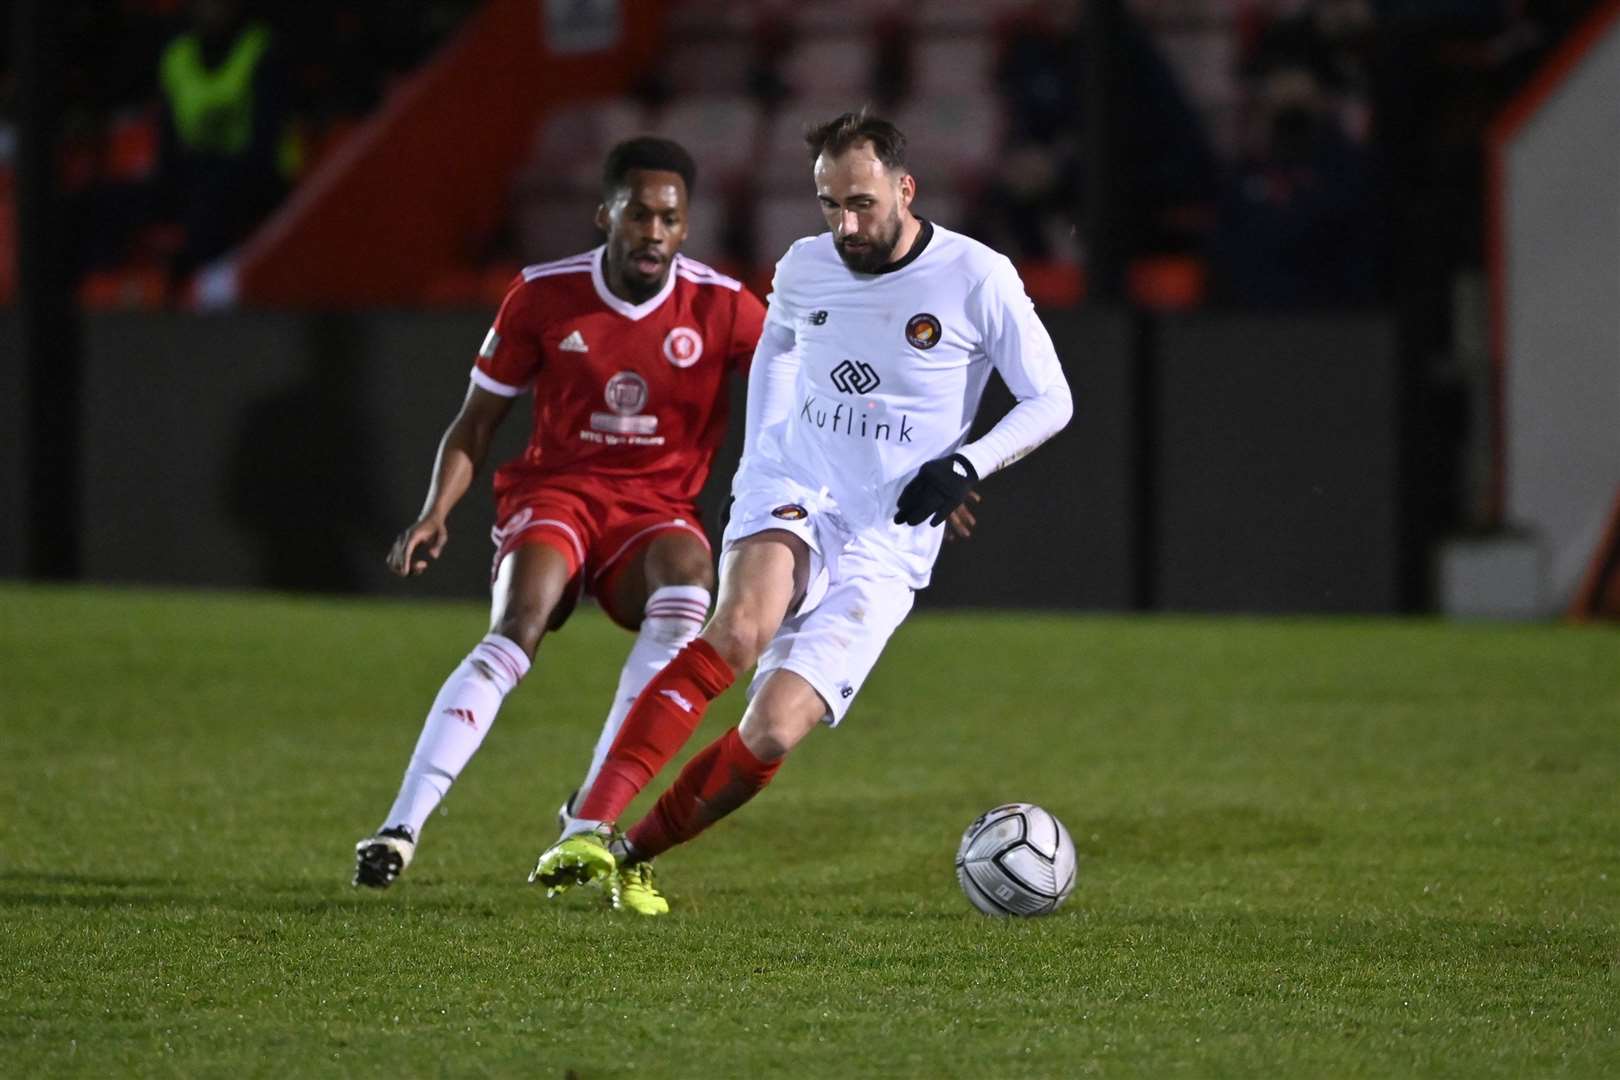 Welling United up against Ebbsfleet United in National League South in February Picture: Keith Gillard